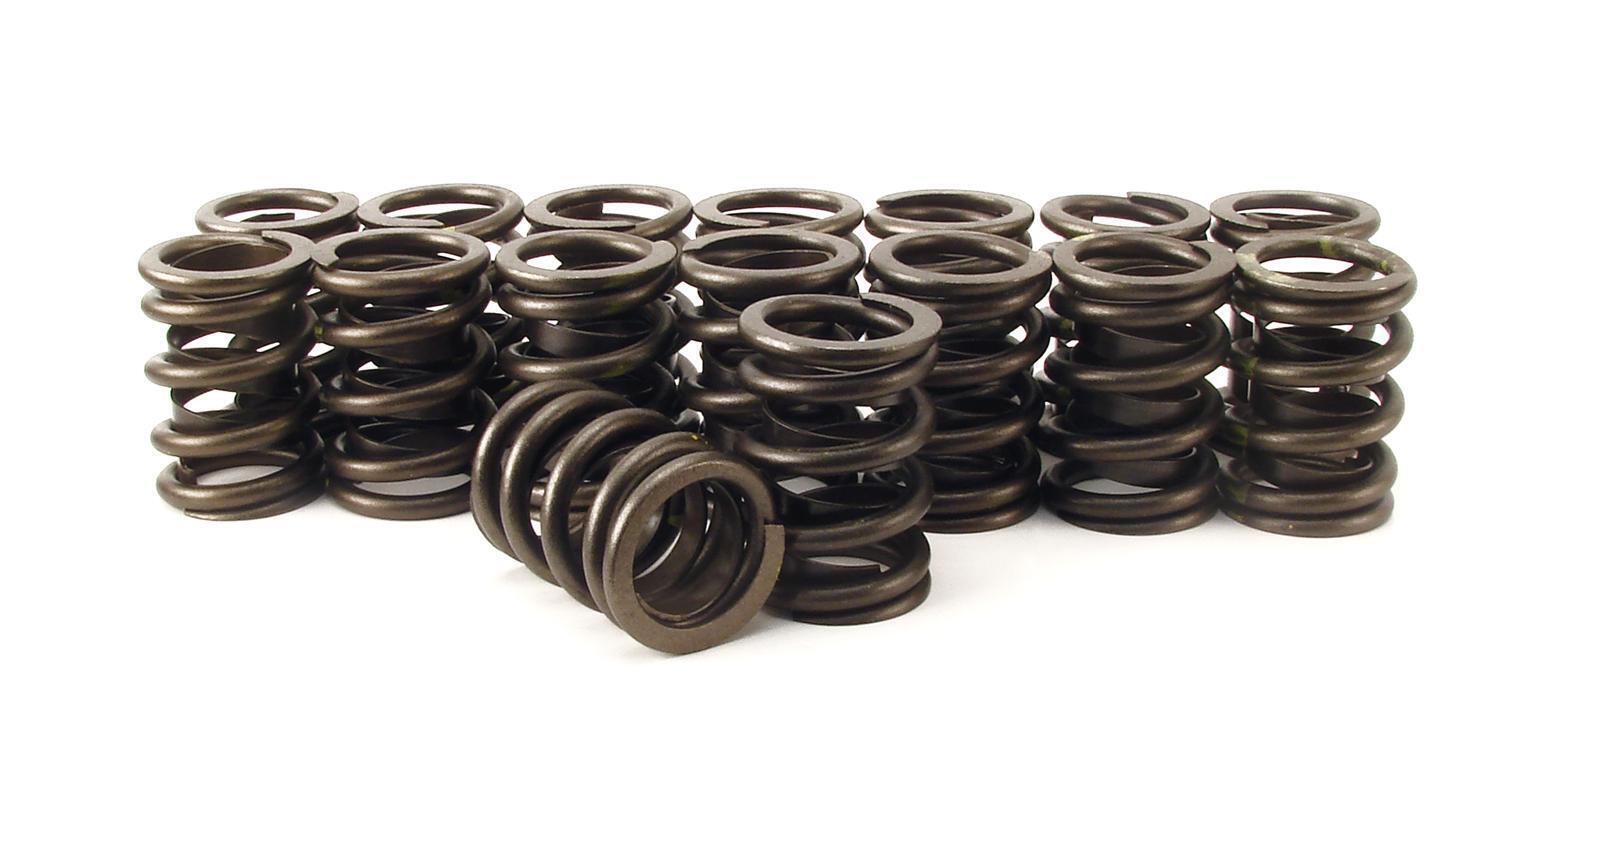 COMP Cams Valve Springs Pack of 16 # CC926-16